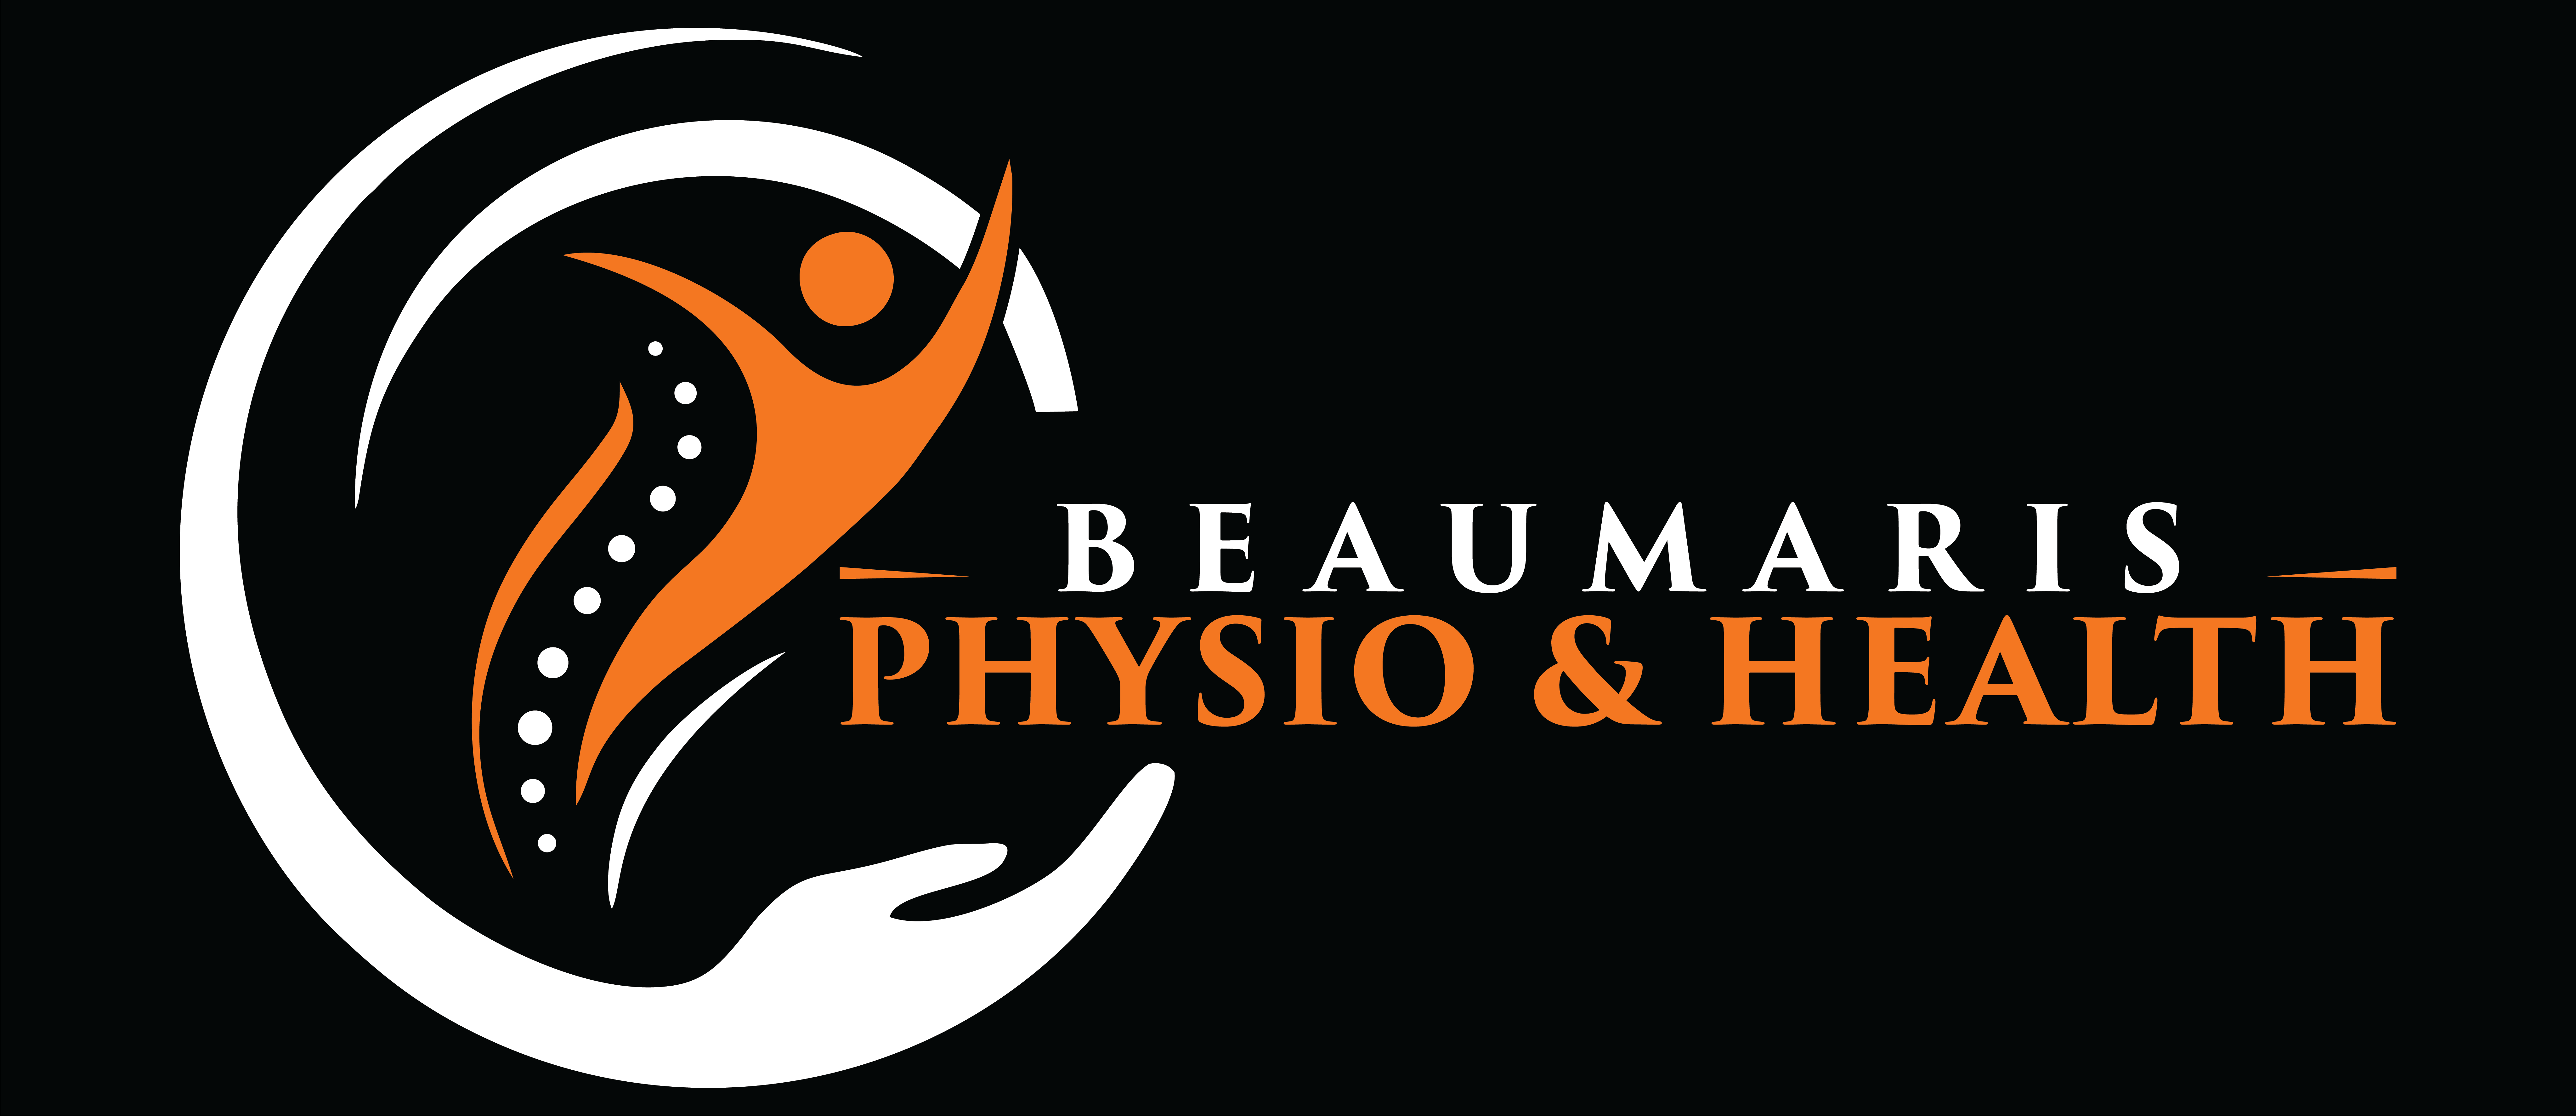 Physiotherapist And Physiotherapy Logos - 36+ Best Physiotherapist And Physiotherapy  Logo Ideas. Free Physiotherapist And Physiotherapy Logo Maker. | 99designs